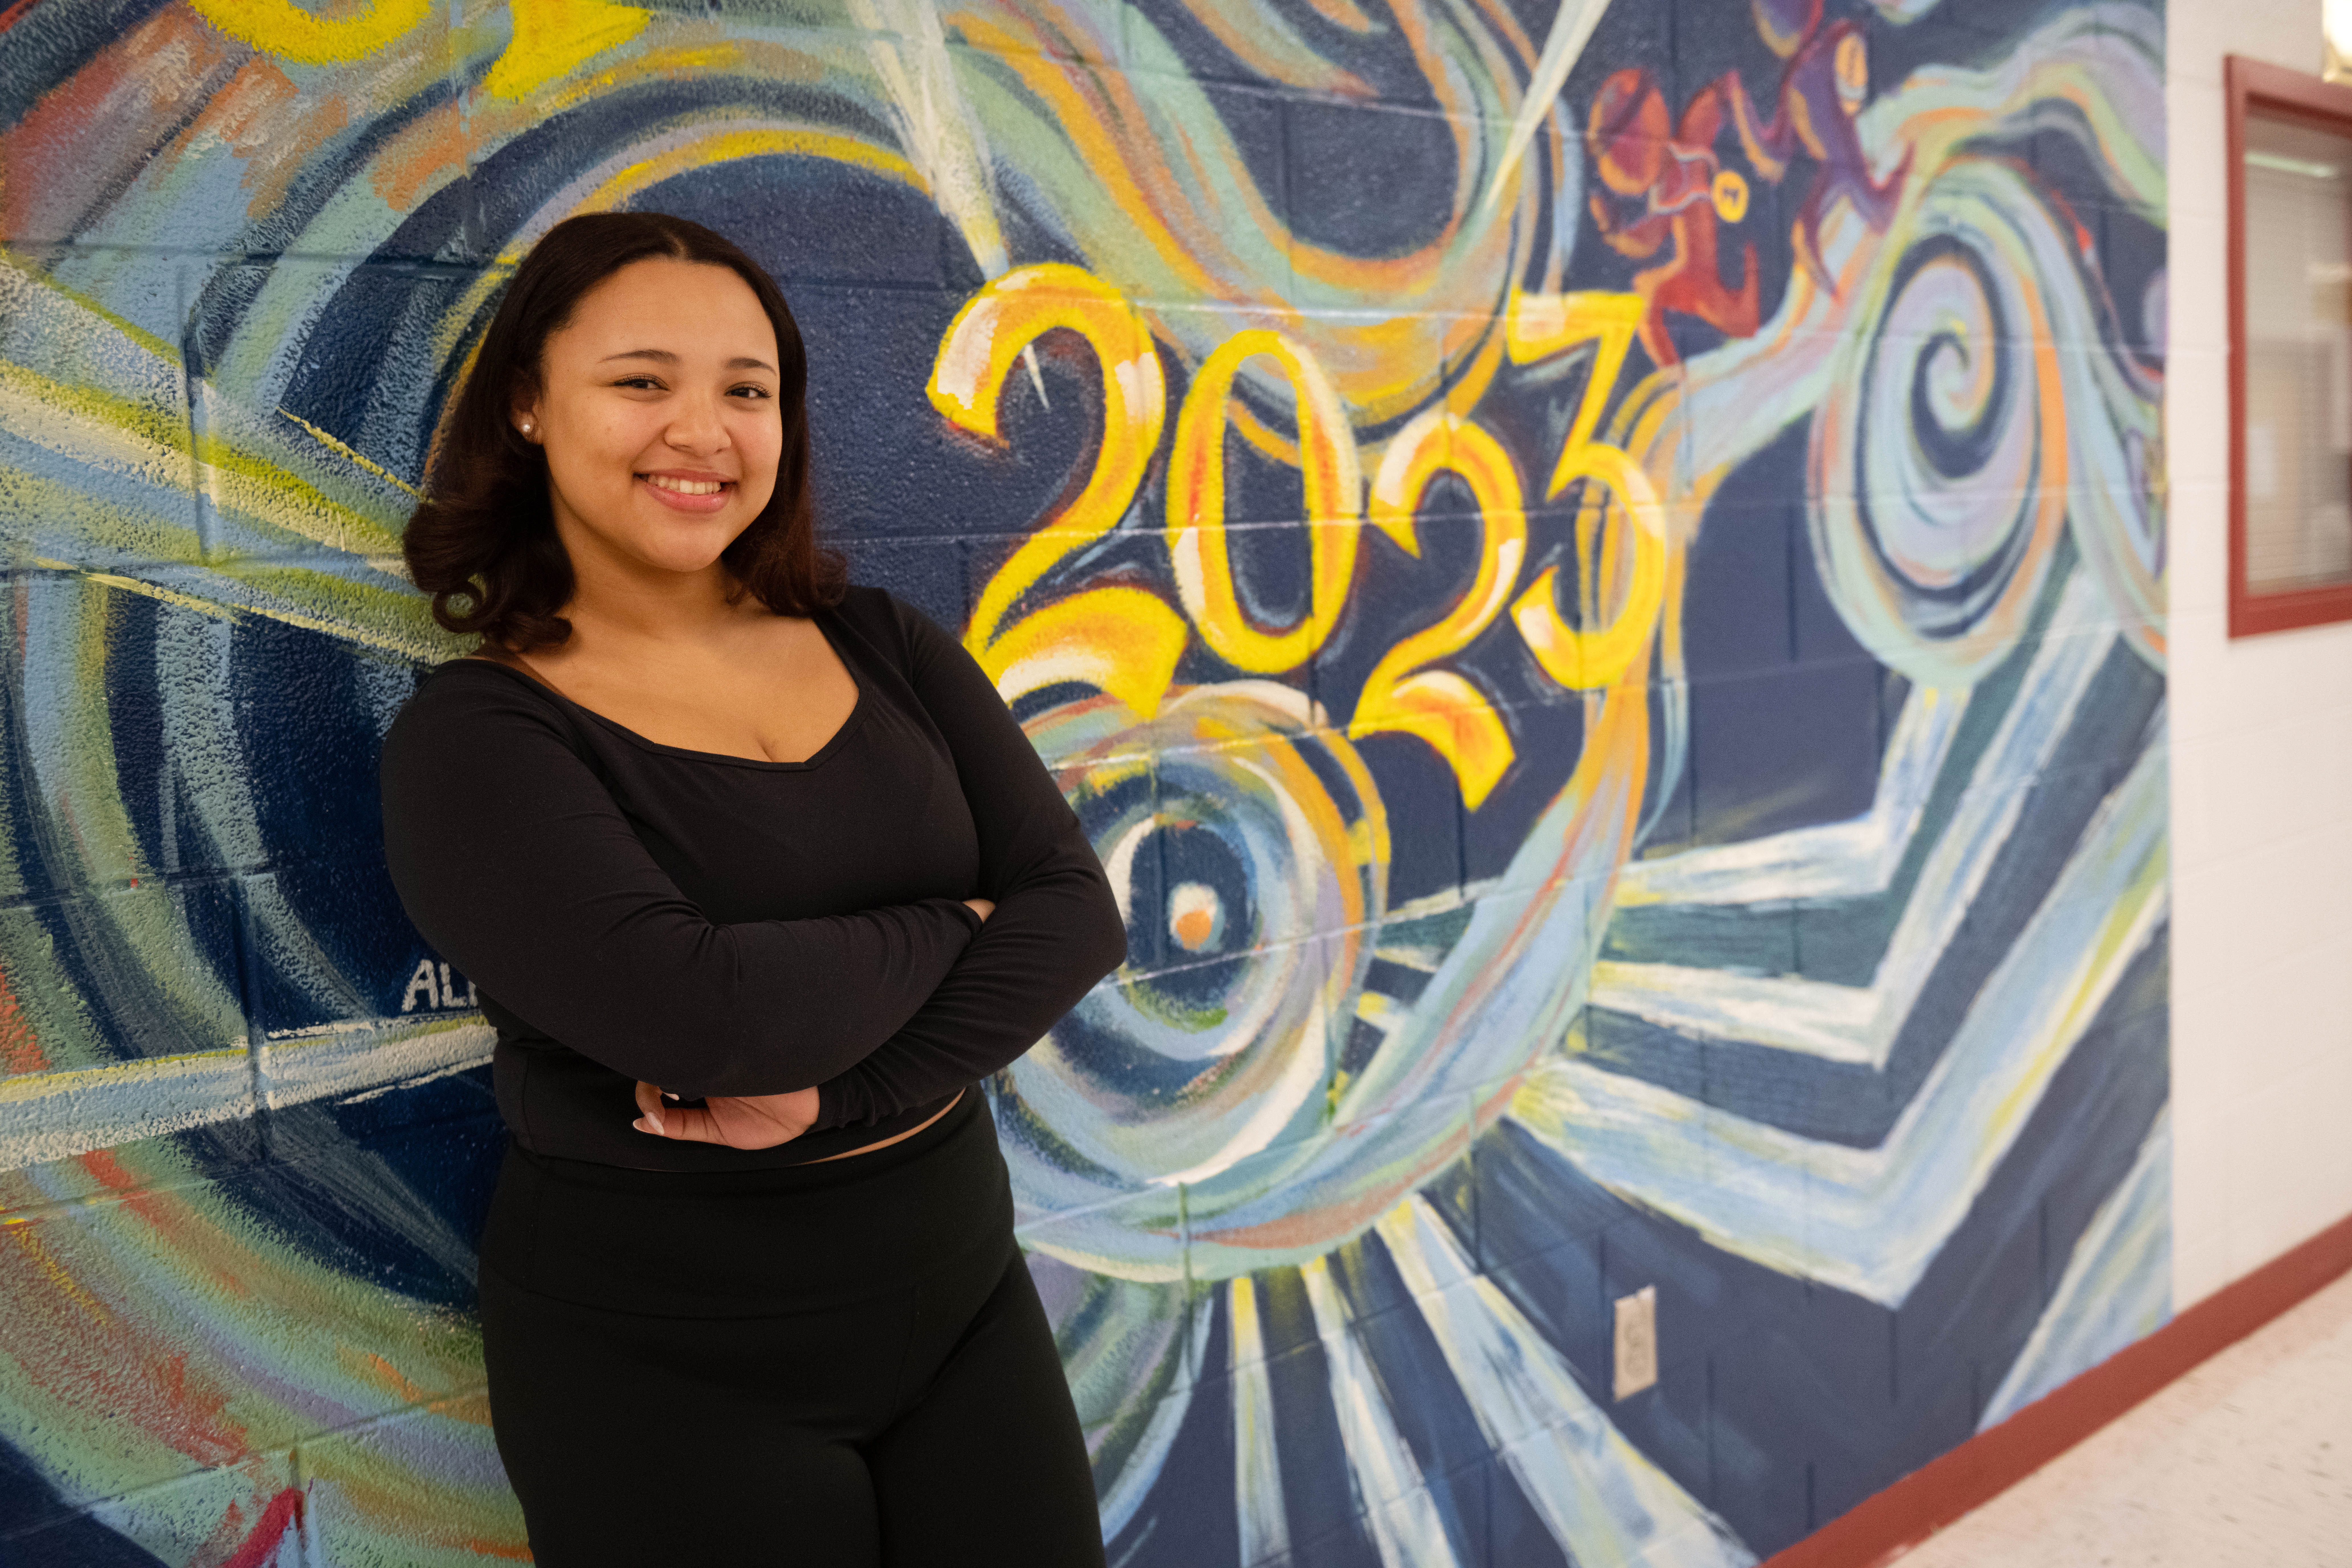 Mackenzie standing in front of a class of 2023 mural.